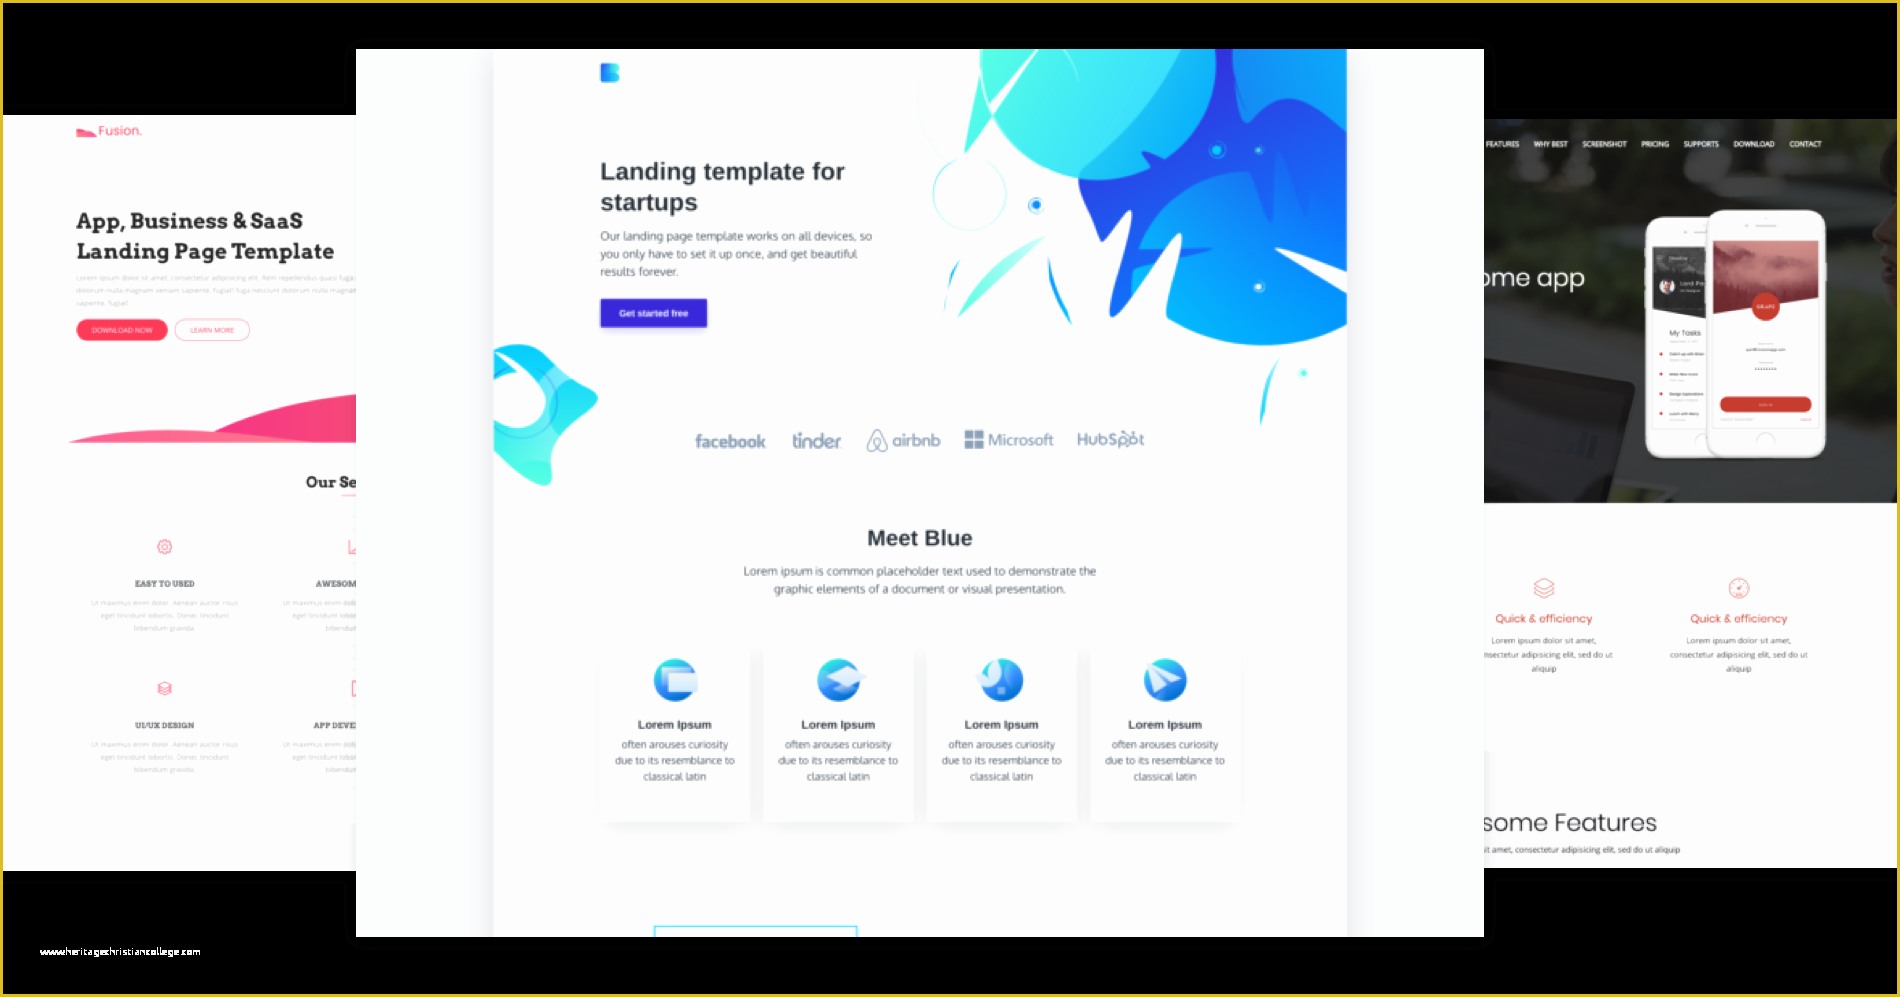 Free Video Landing Page Templates Of 22 Best Free App Landing Page Templates You Need to See now